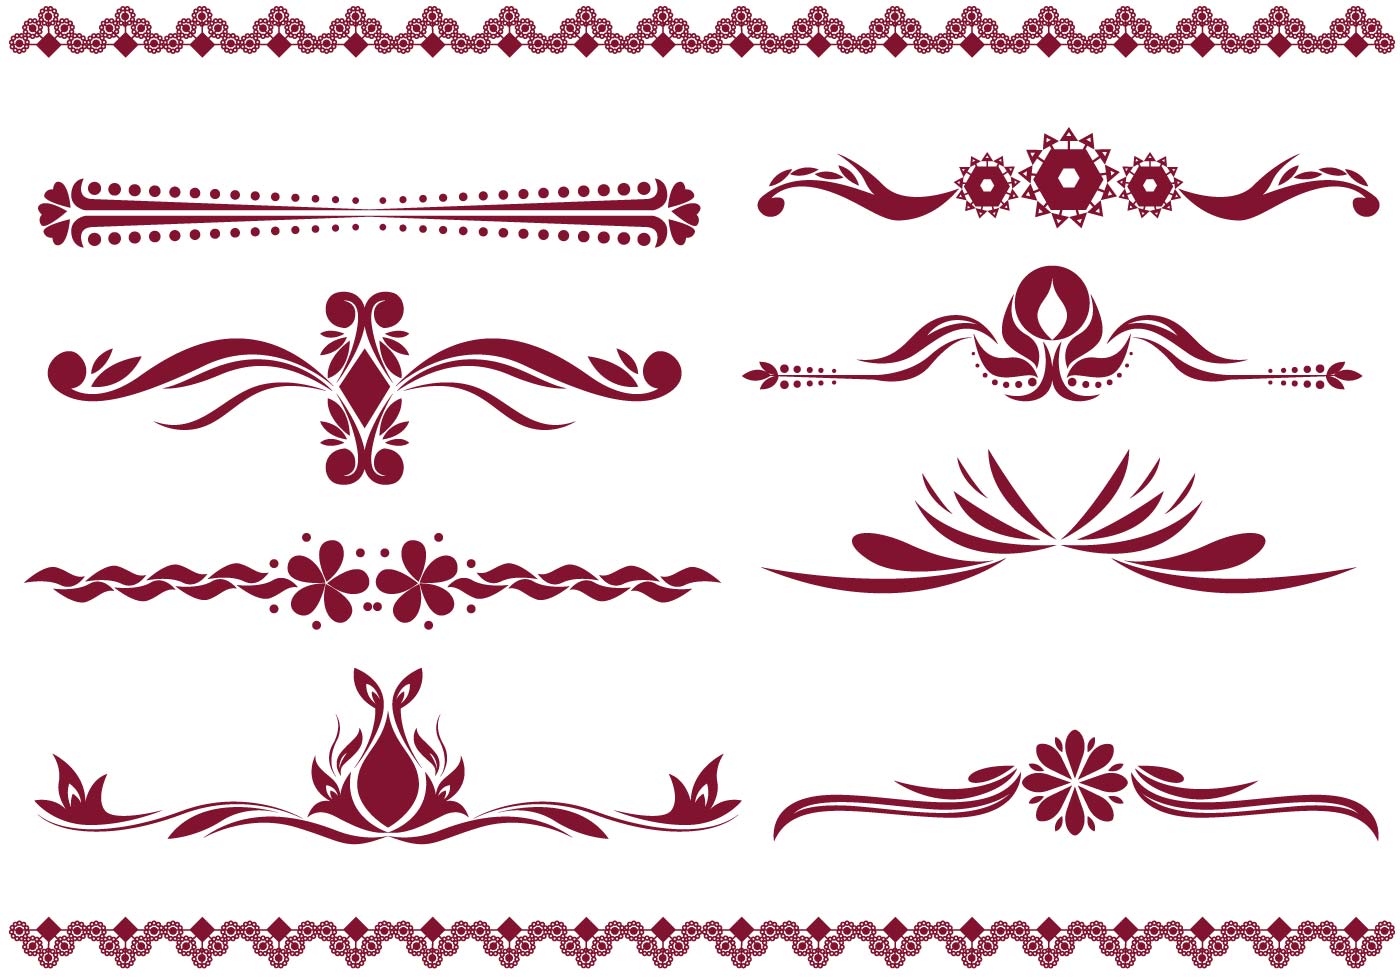 570 Fancy vector images at Vectorified.com